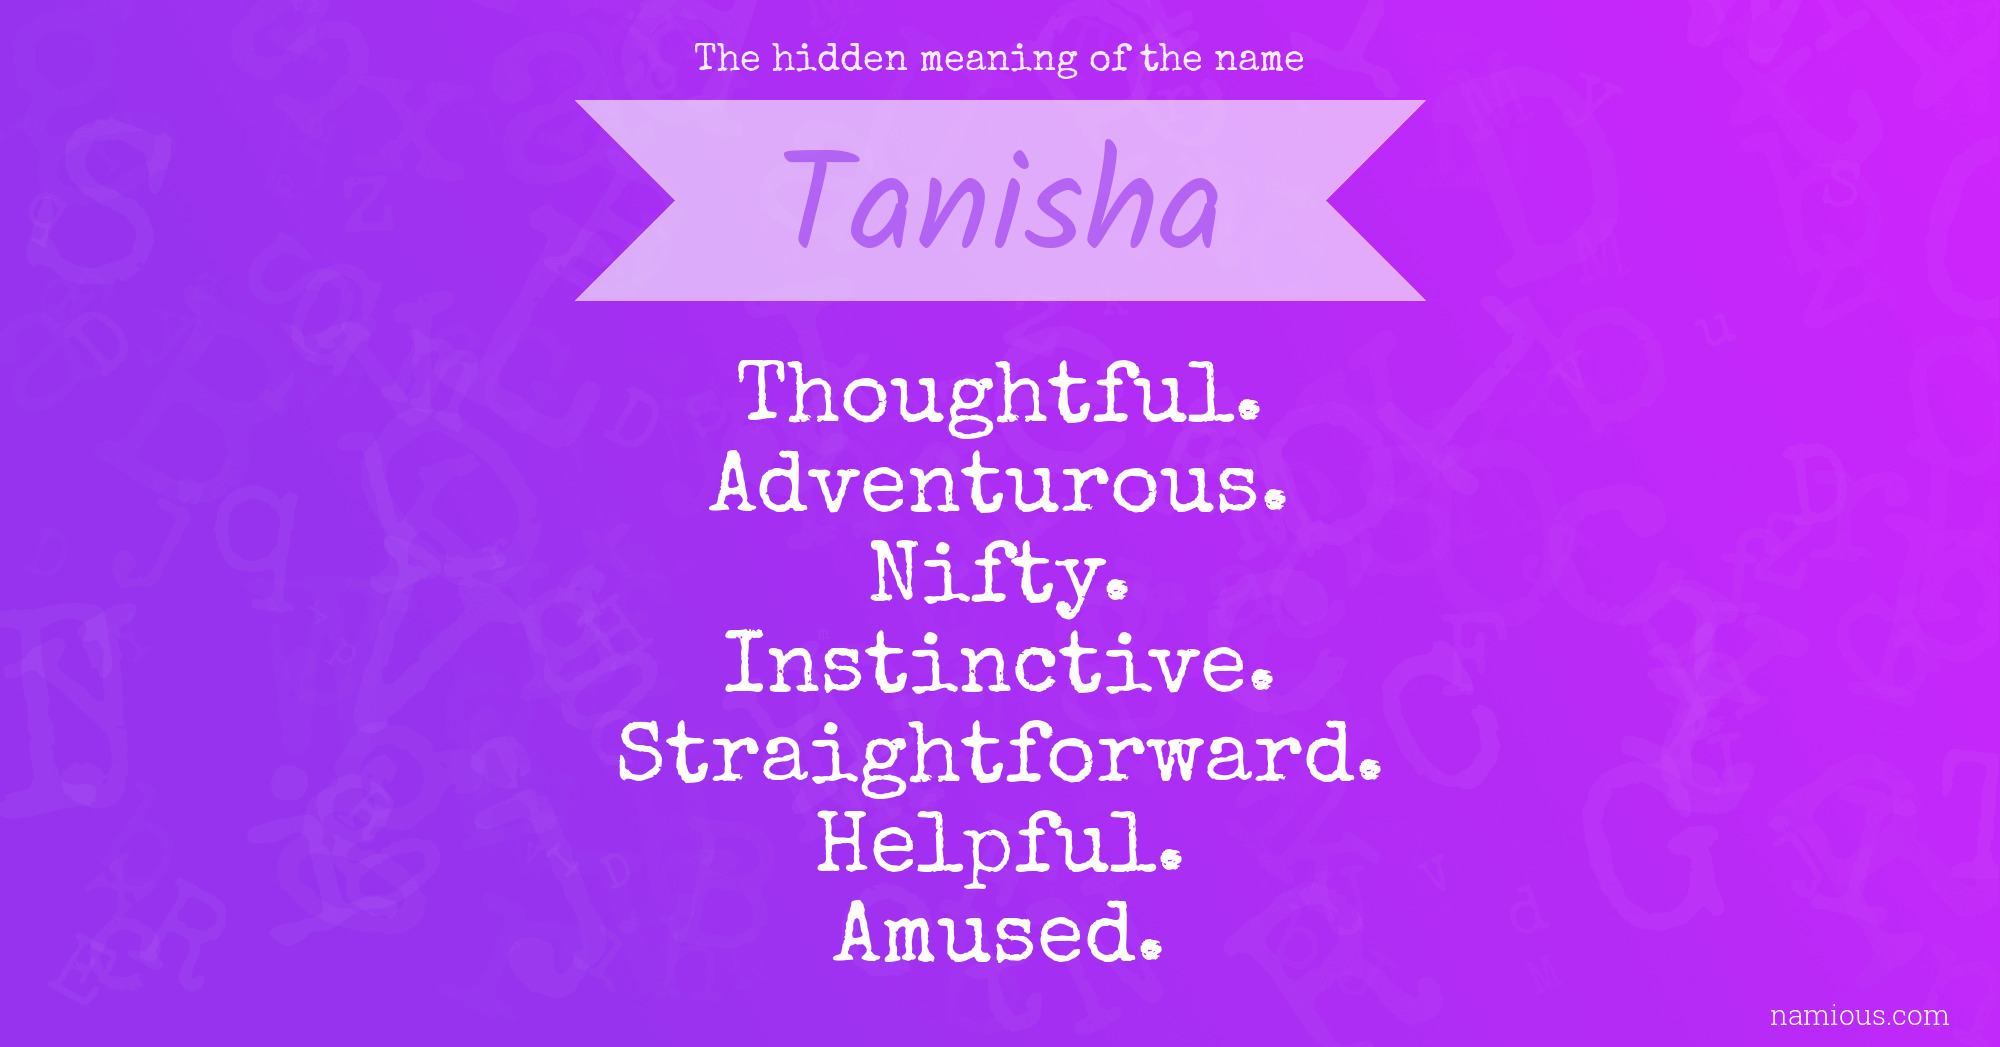 The hidden meaning of the name Tanisha